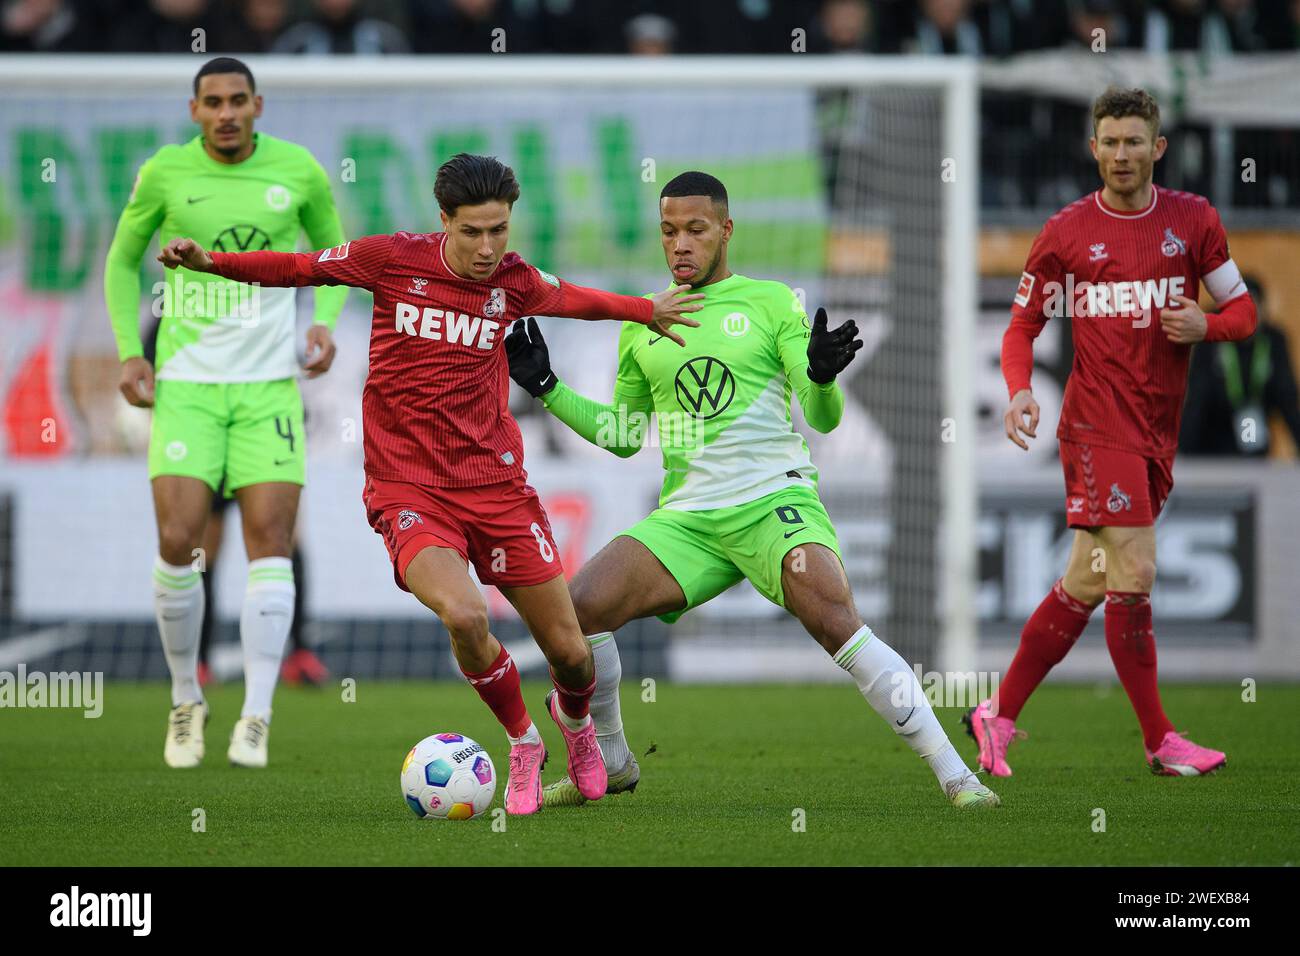 Wolfsburg, Germany. 27th Jan, 2024. Soccer, Bundesliga, VfL Wolfsburg - 1. FC Köln, Matchday 19, Volkswagen Arena. Cologne's Denis Huseinbasic (l) plays against Wolfsburg's Aster Vranckx. Credit: Swen Pförtner/dpa - IMPORTANT NOTE: In accordance with the regulations of the DFL German Football League and the DFB German Football Association, it is prohibited to utilize or have utilized photographs taken in the stadium and/or of the match in the form of sequential images and/or video-like photo series./dpa/Alamy Live News Stock Photo